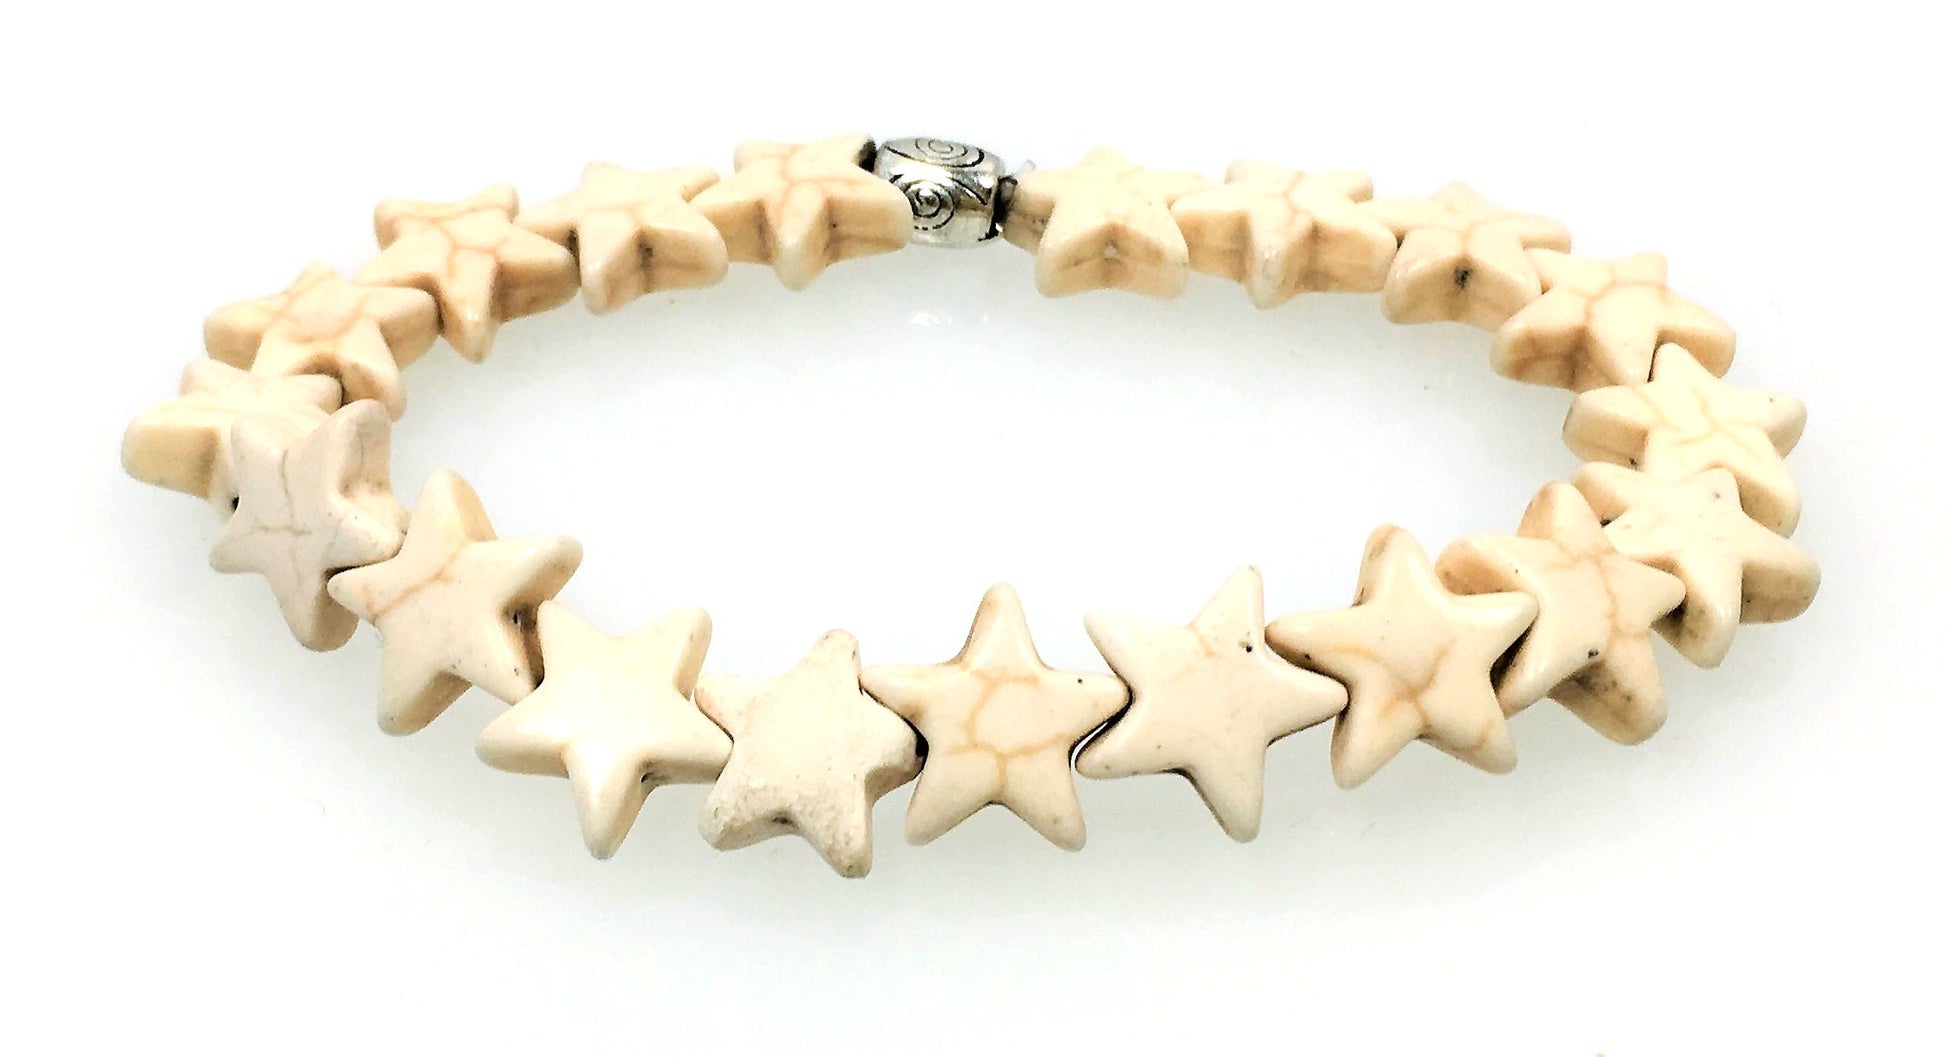 MAKE A WISH! ON YOUR OWN STAR - Ivory Stone - Low Tide Island Designs